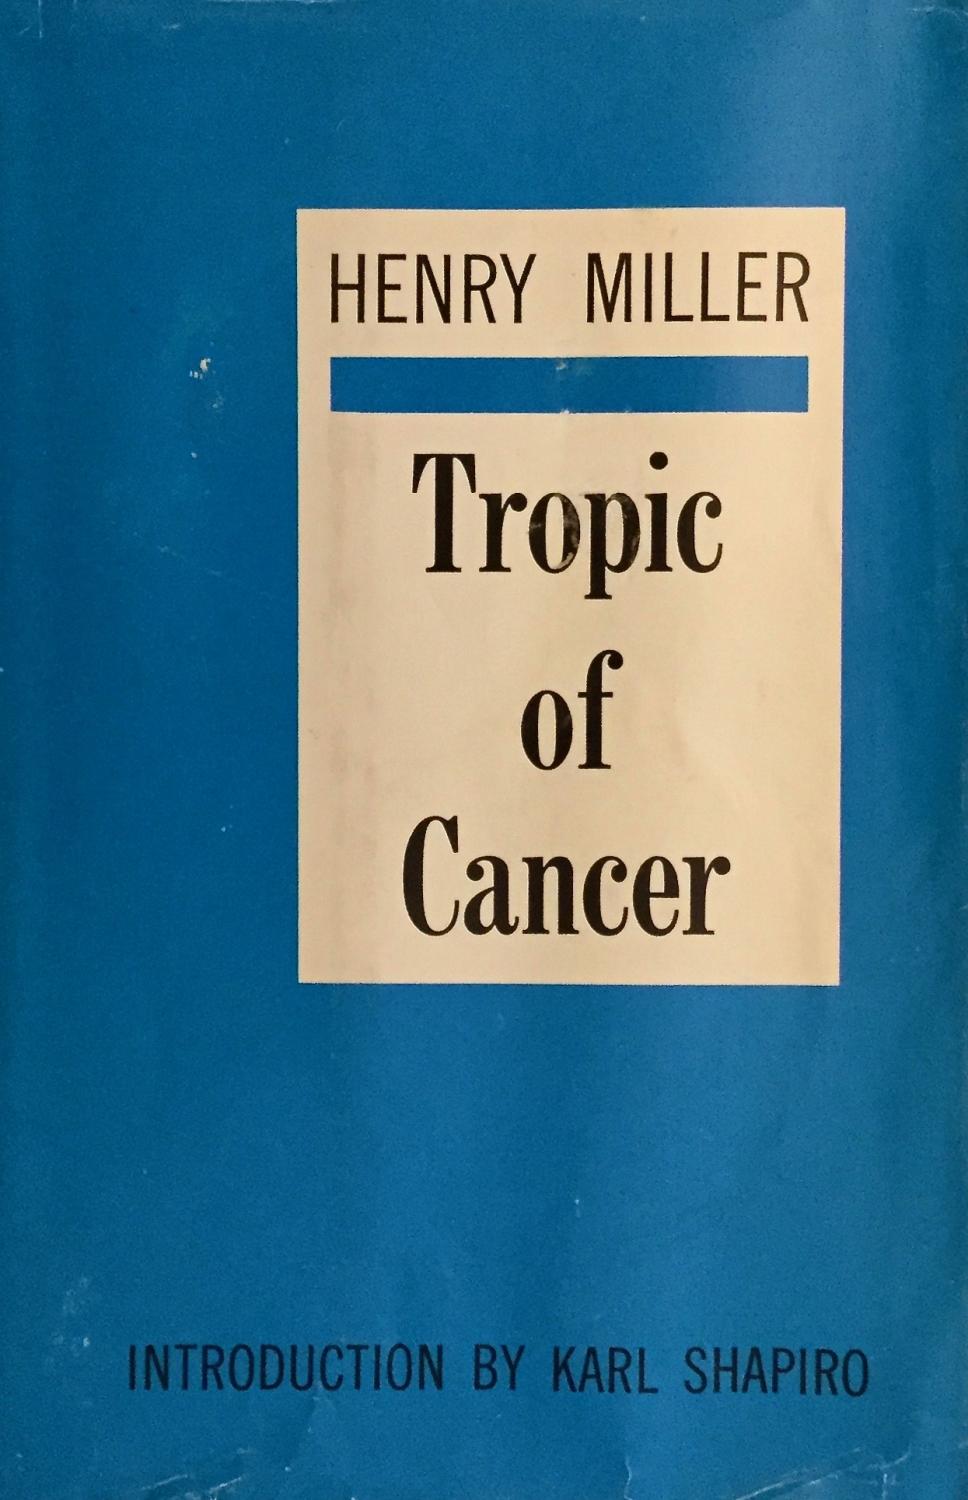 DRAGON Covers / Henry Miller / Tropic of Cancer